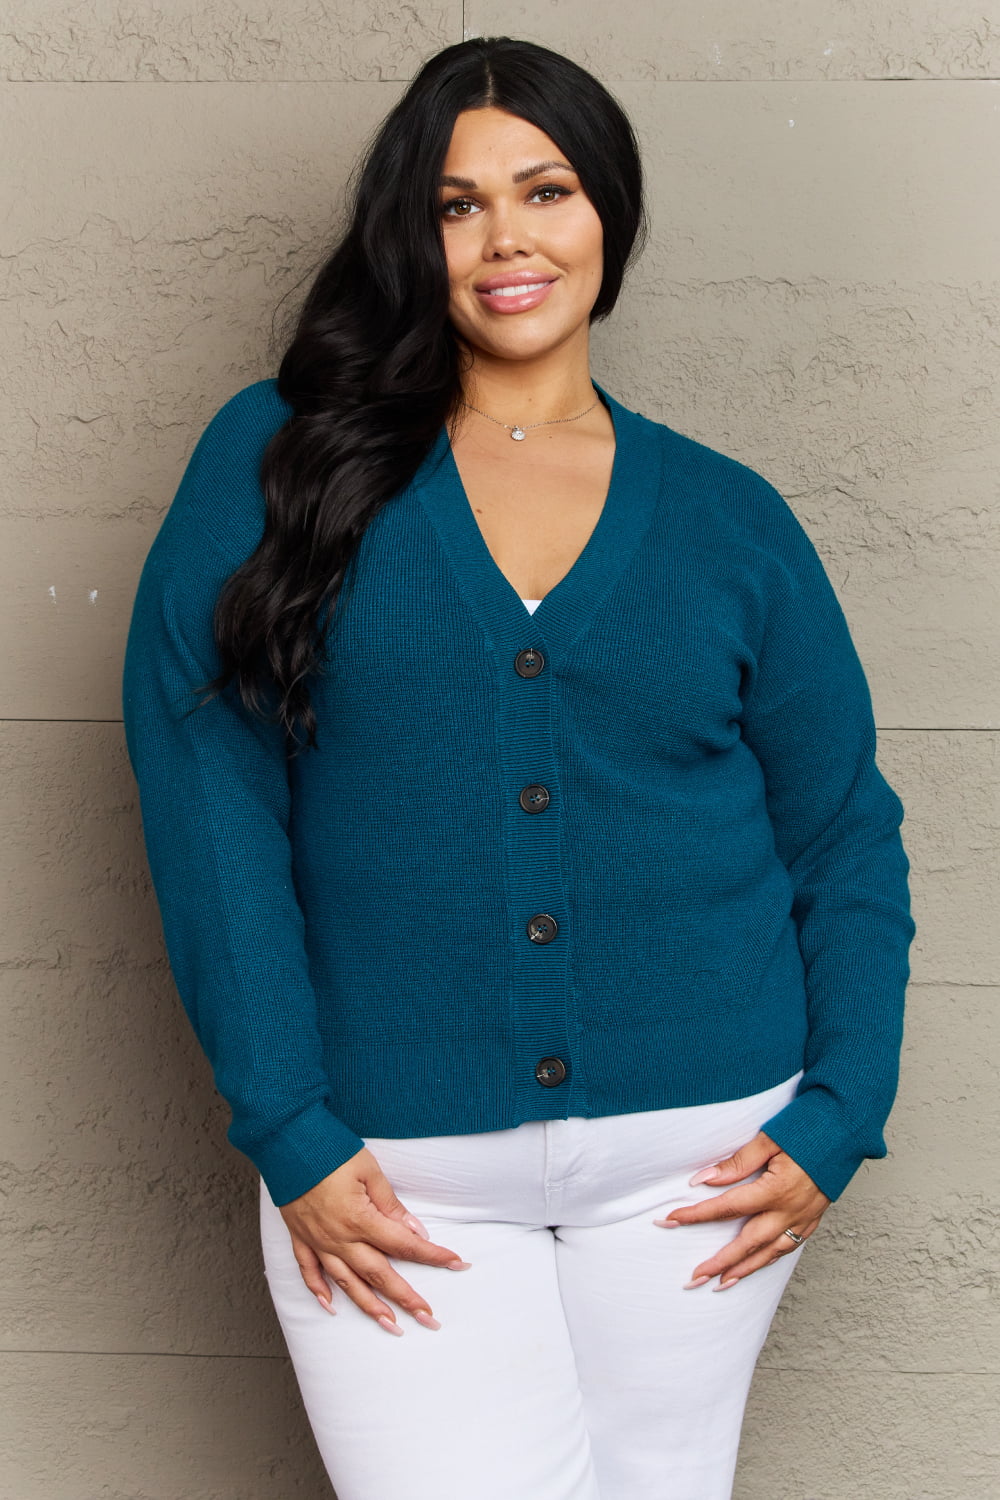 Kiss Me Tonight Button Down Cardigan in Teal - Lola Cerina Boutique